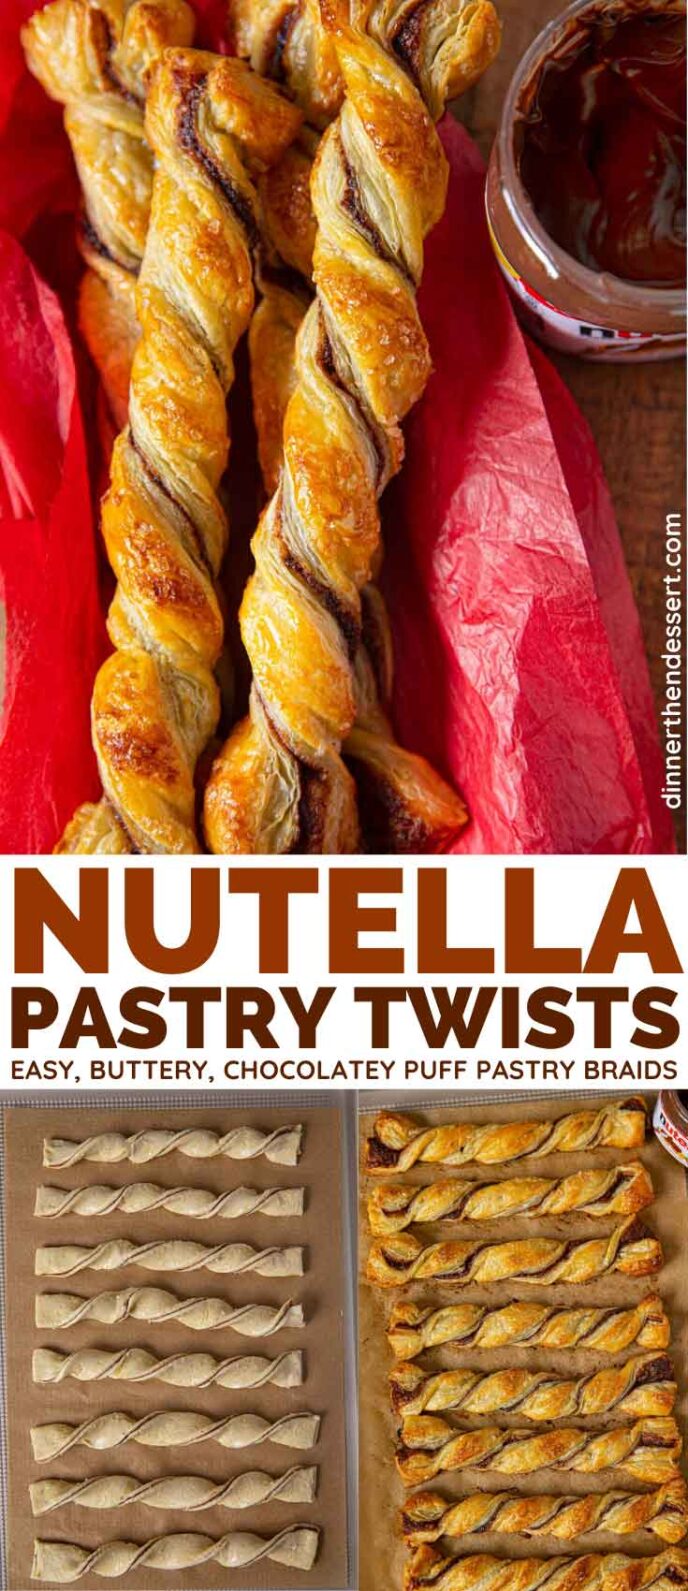 Nutella Pastry Twists collage